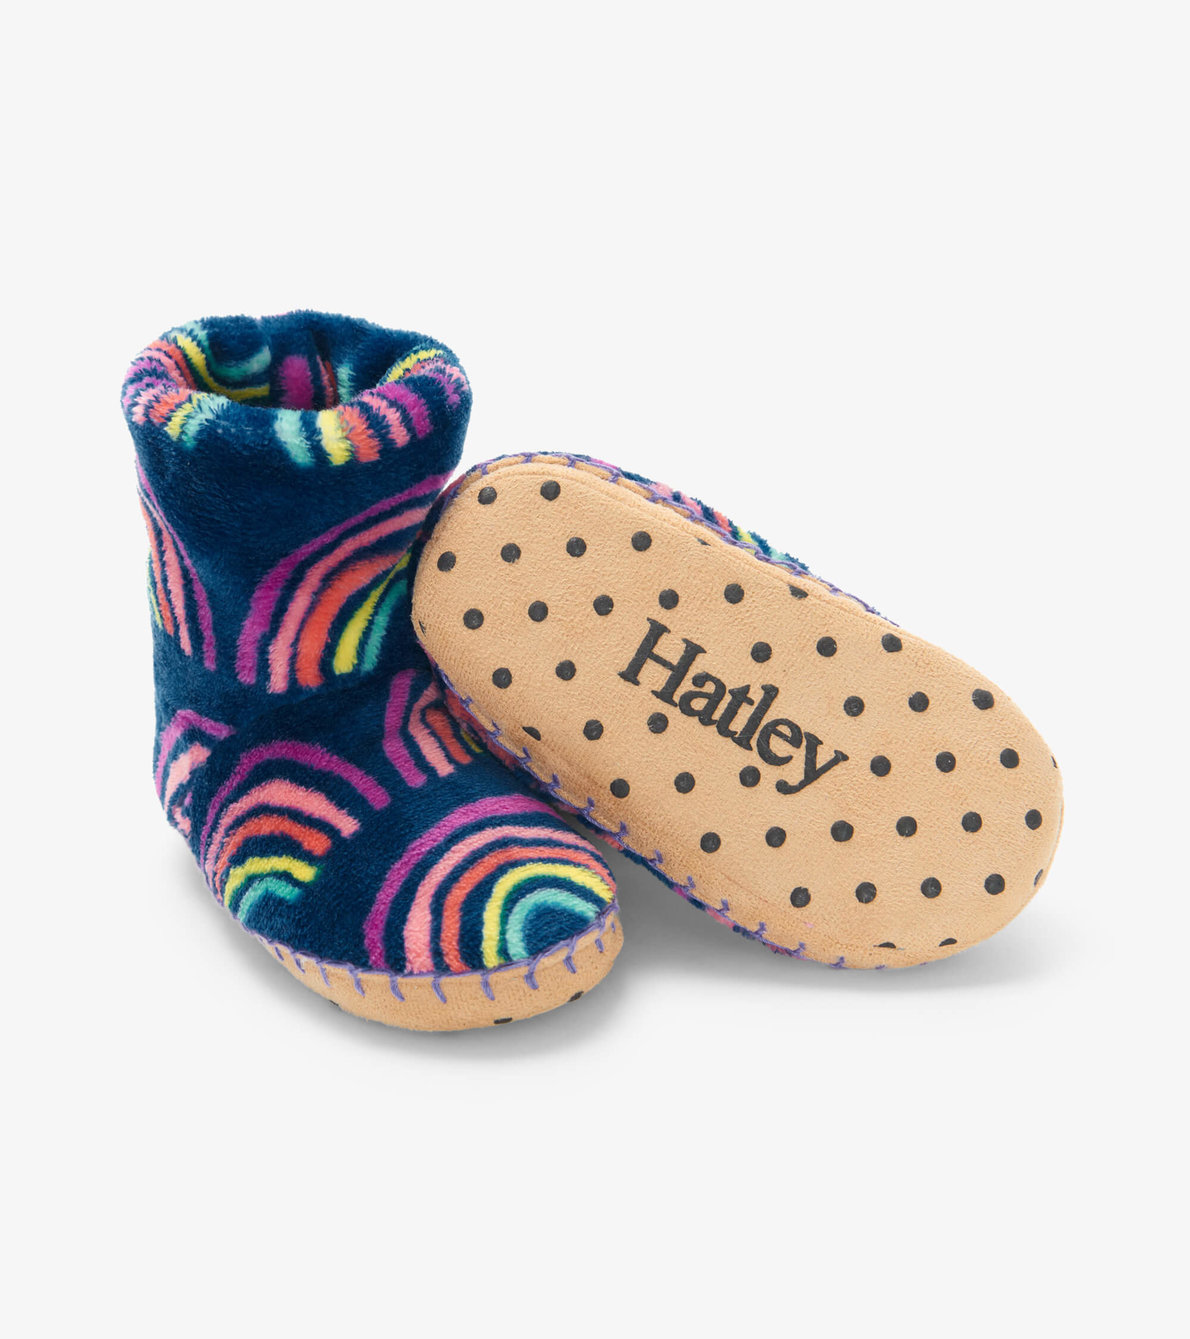 View larger image of Rainbow Dreams Fleece Slippers